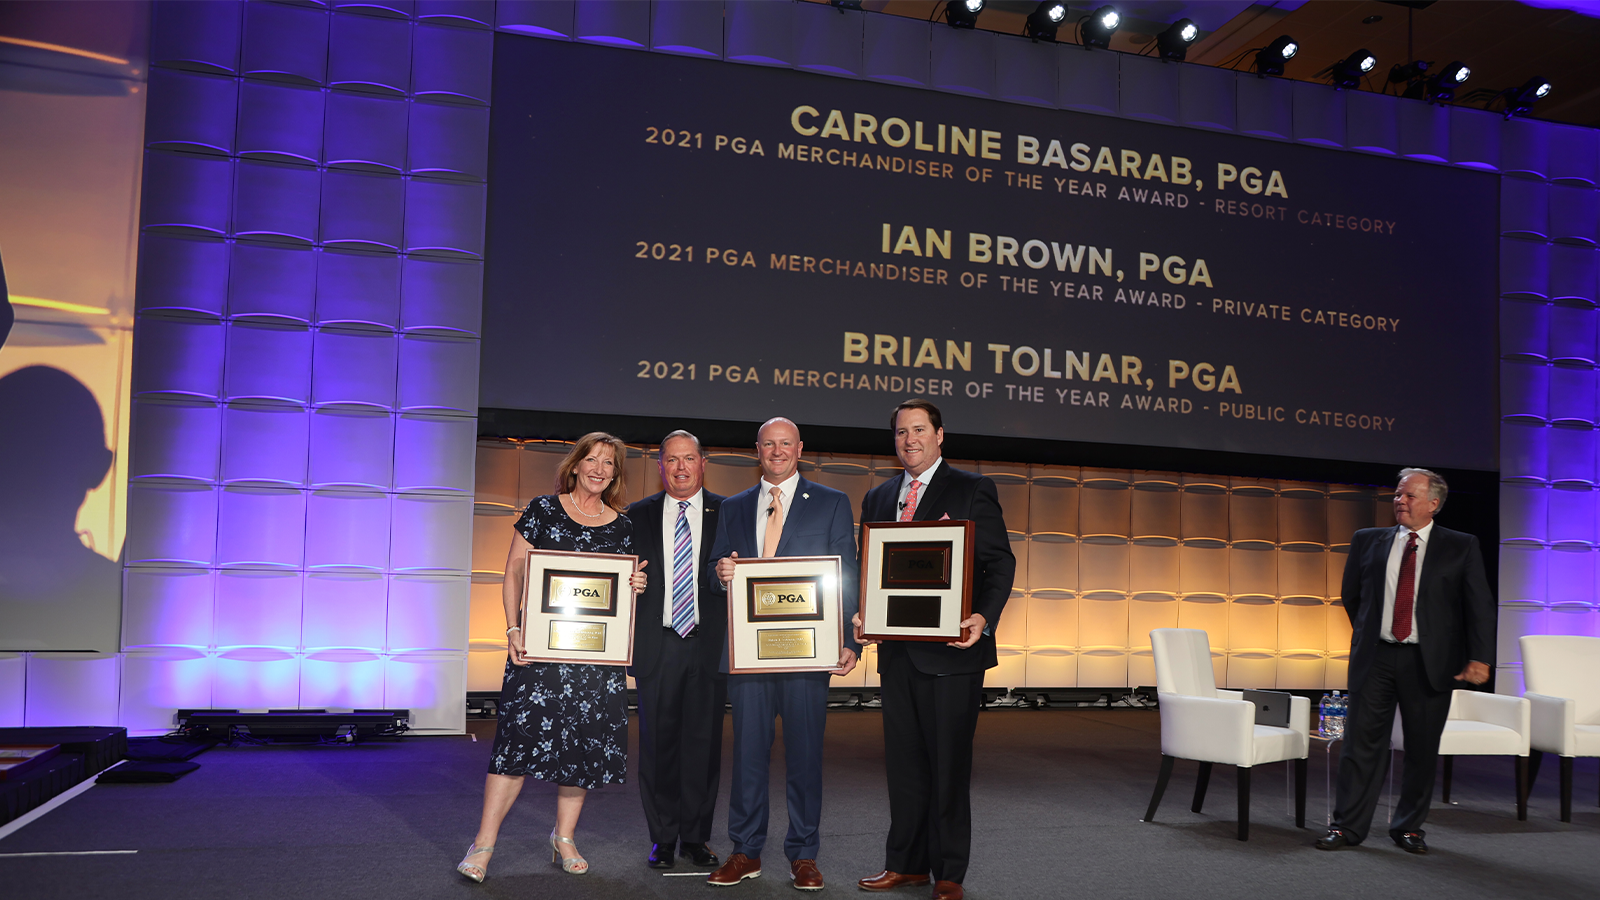 PGA of America President Jim Richerson poses for a photo with winners of the PGA Merchandiser of the Year Award, Resort Category - Caroline Basarab, Public Category - Brian Tolnar, and Private Category- Ian Brown during the PGA Special Awards night for the 106th PGA Annual Meeting at JW Marriott Phoenix Desert Ridge Resort & Spa on Tuesday, November 1, 2022 in Phoenix, Arizona. (Photo by Sam Greenwood/PGA of America)